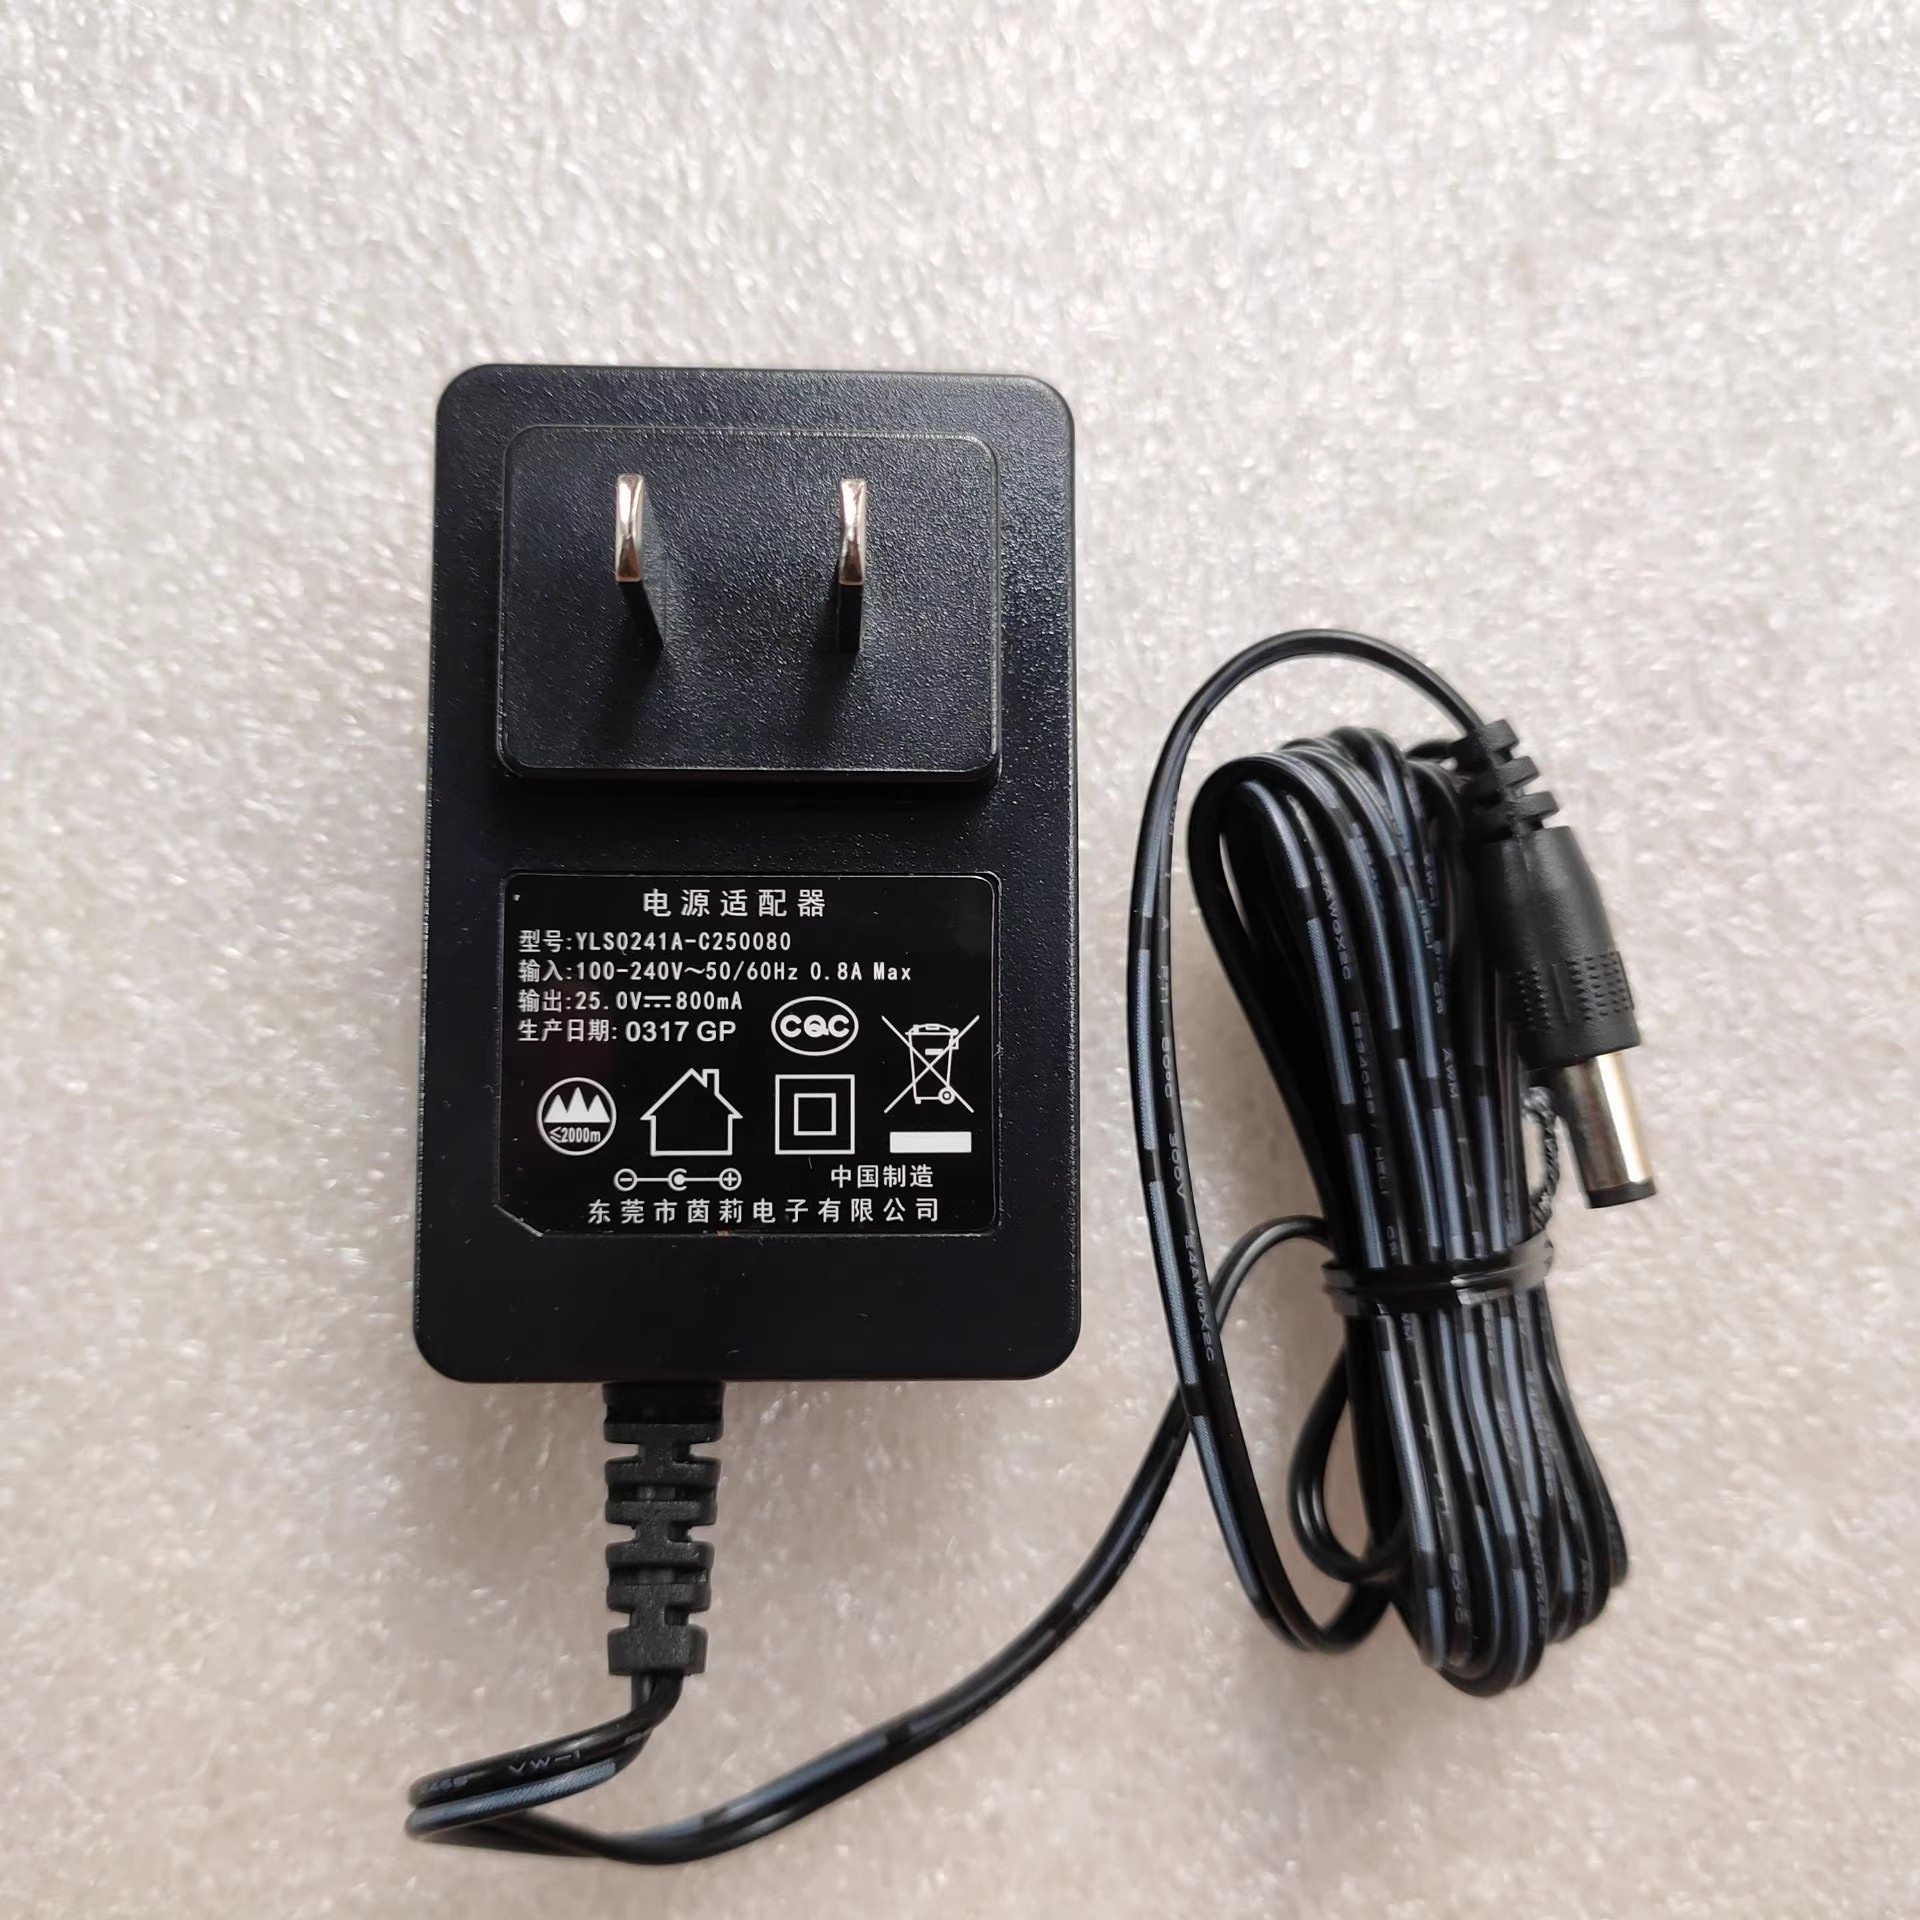 *Brand NEW* YLS0241A-C250080 25V 800MA AC DC ADAPTHE POWER Supply